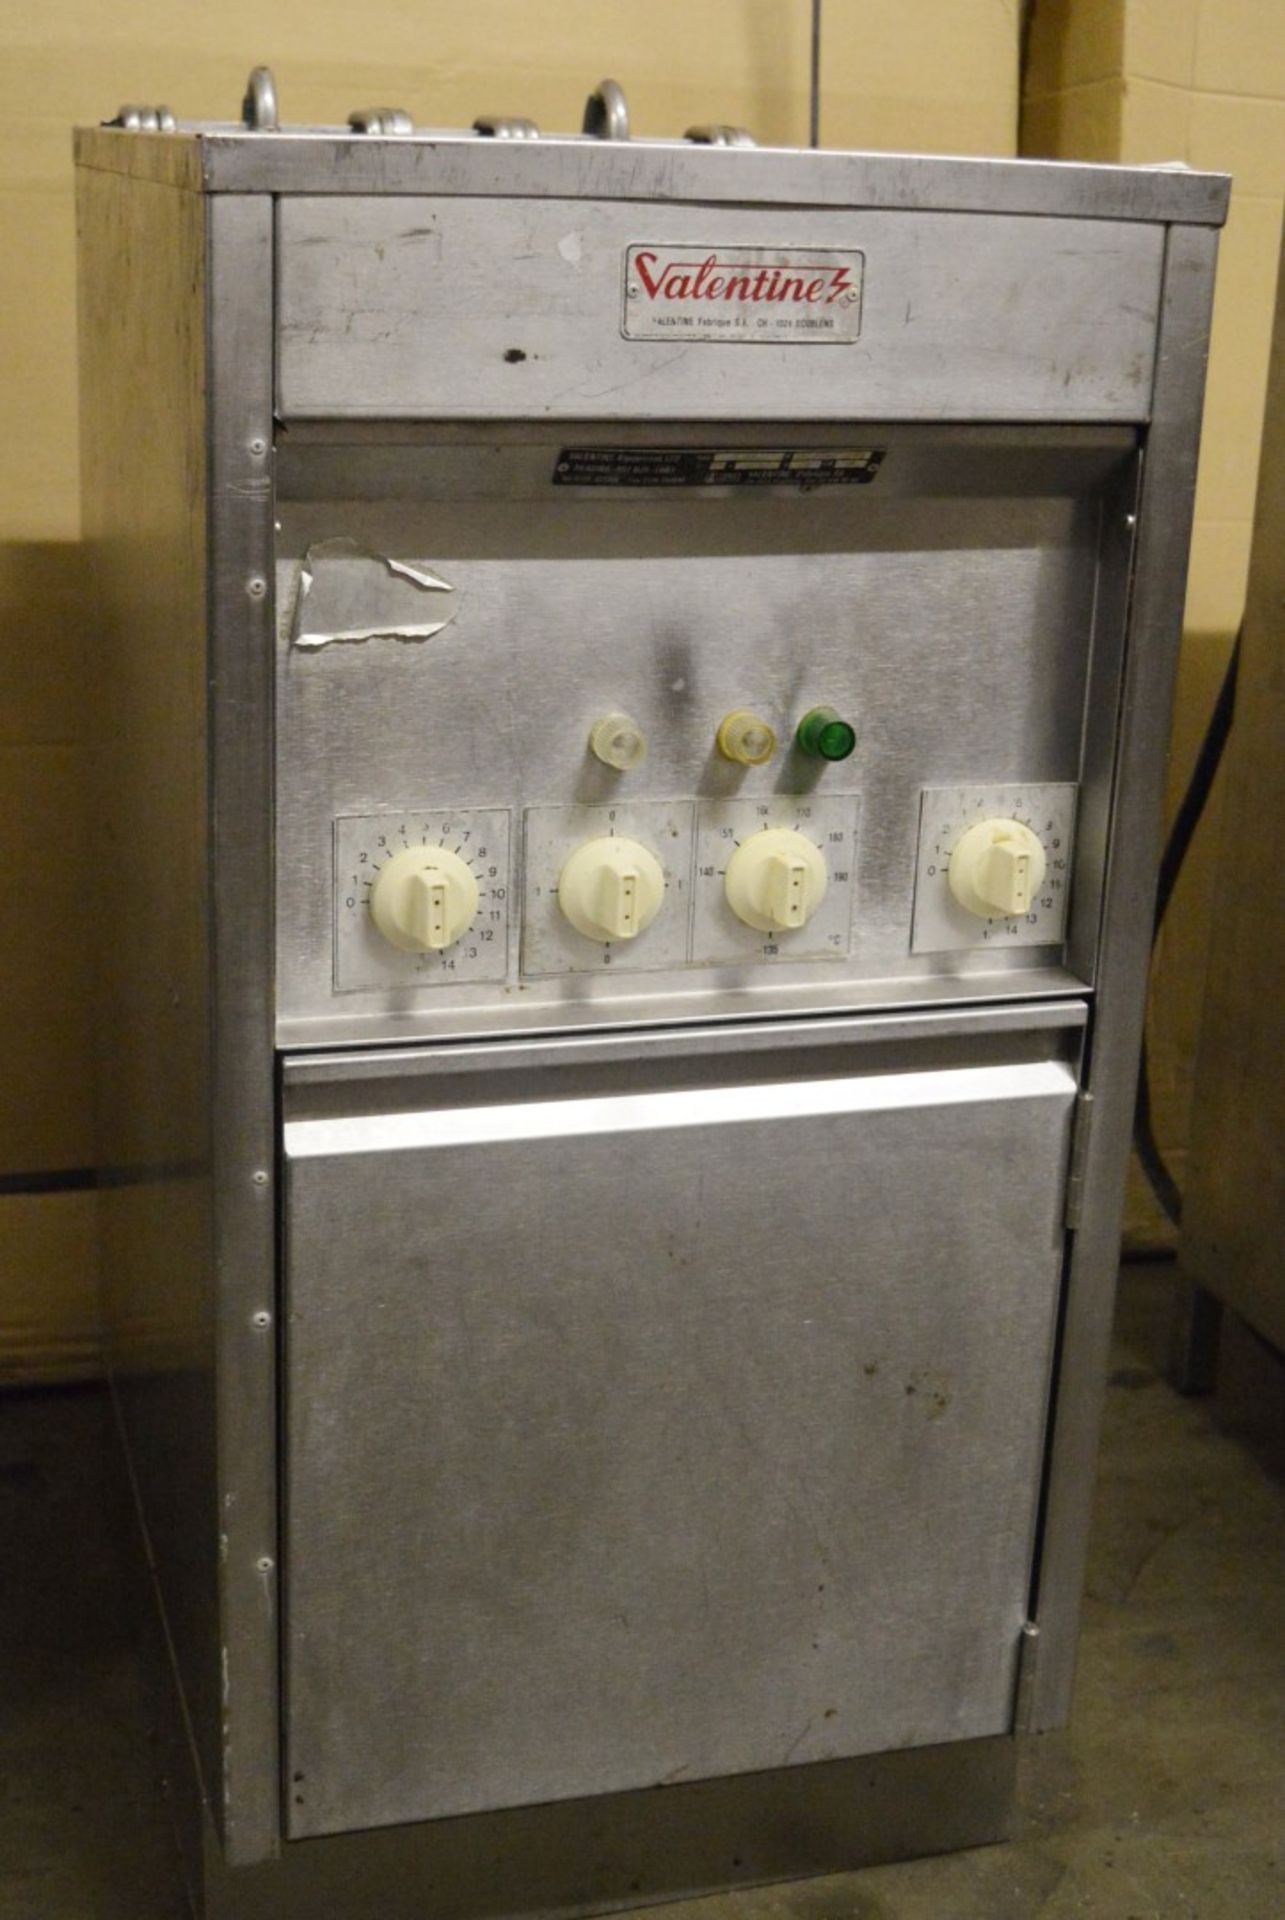 1 x Valentine VMC 1 Stainless Steel Freestanding Fryer - 3 Phase - CL232 - Ref JP505 - Location: - Image 4 of 7